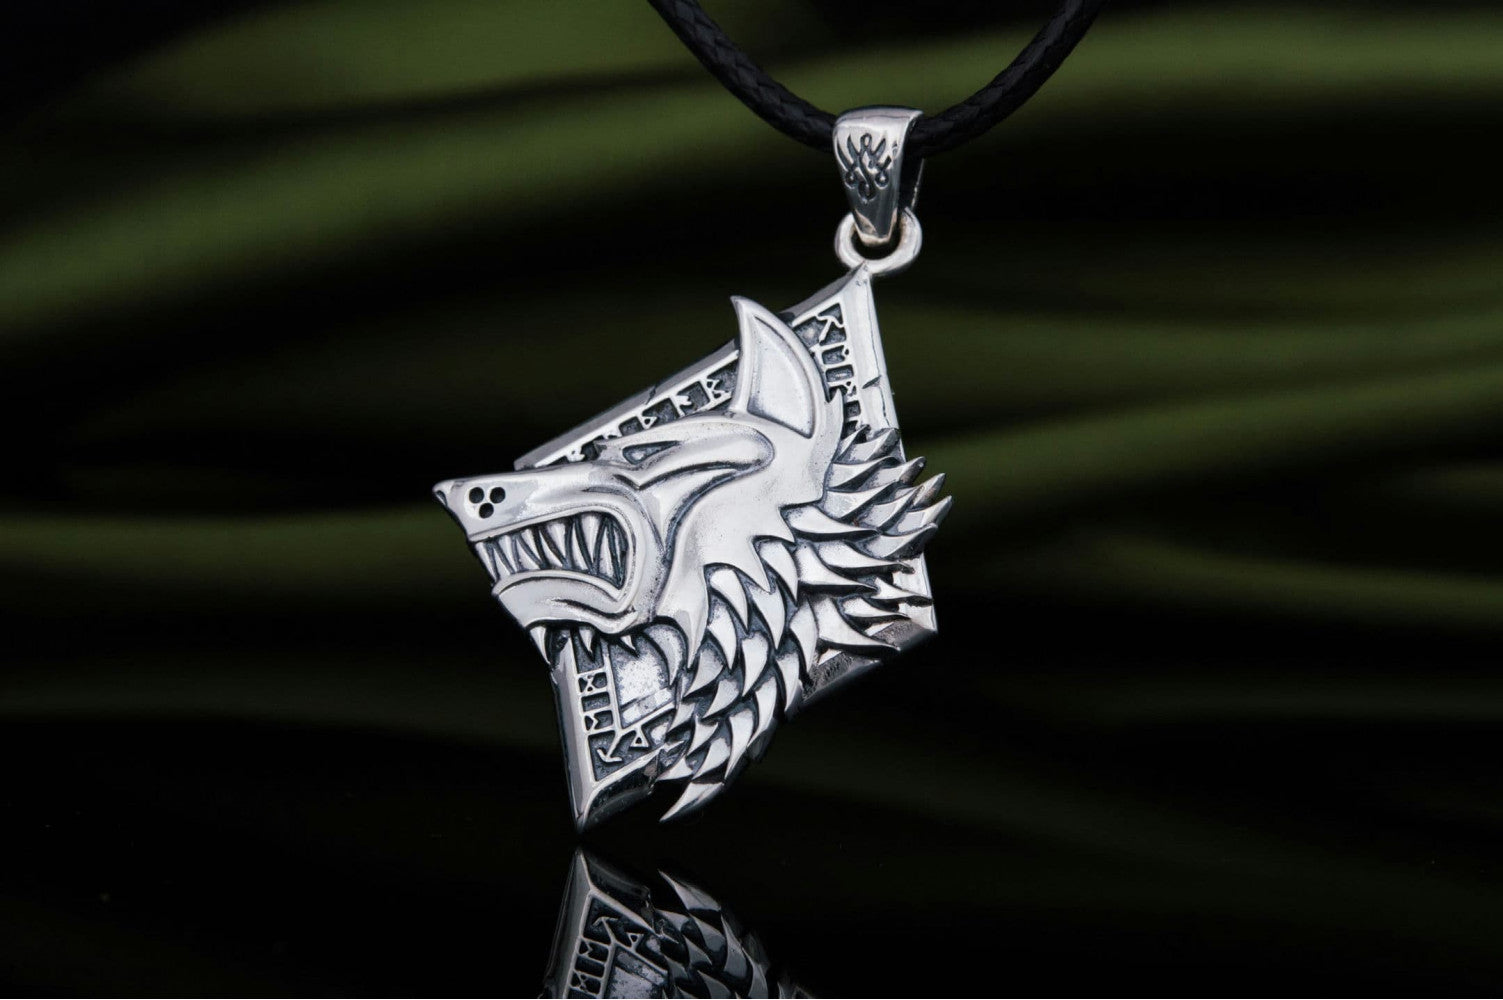 Handmade Pendant with Wolf Sterling Silver Jewelry